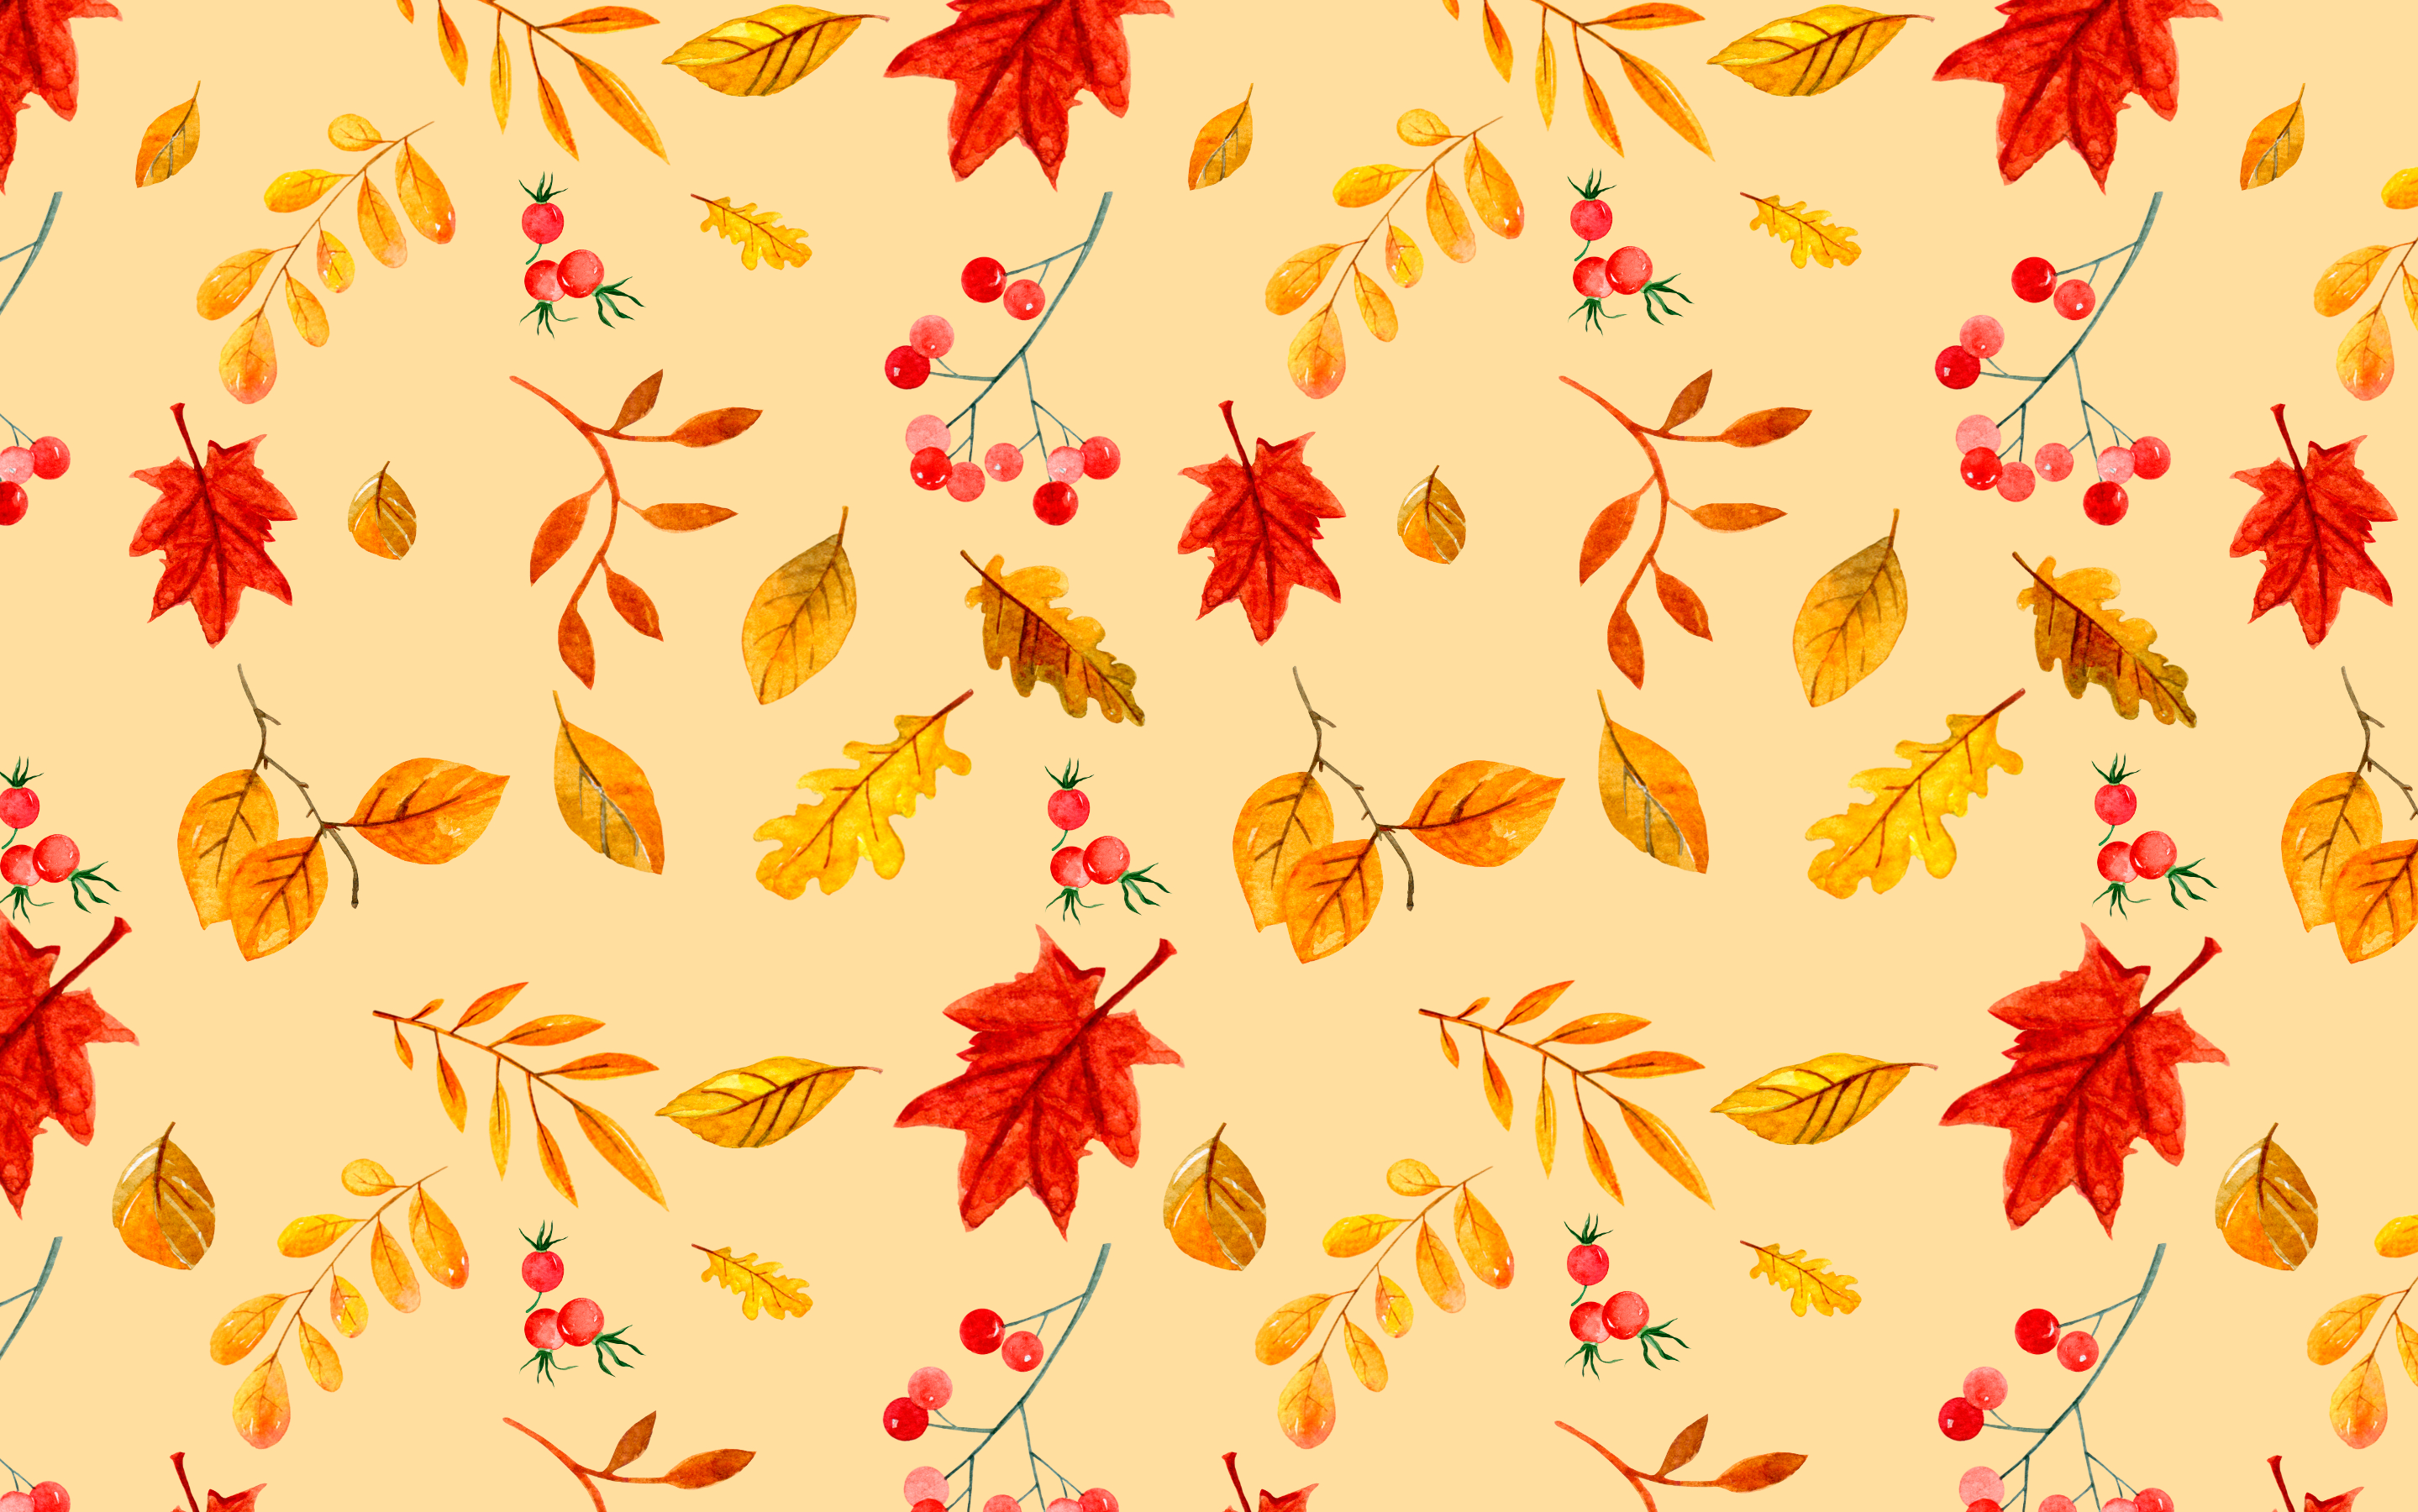 FREE AUTUMN LEAF WALLPAPER FOR YOUR DESKTOP OR PHONE